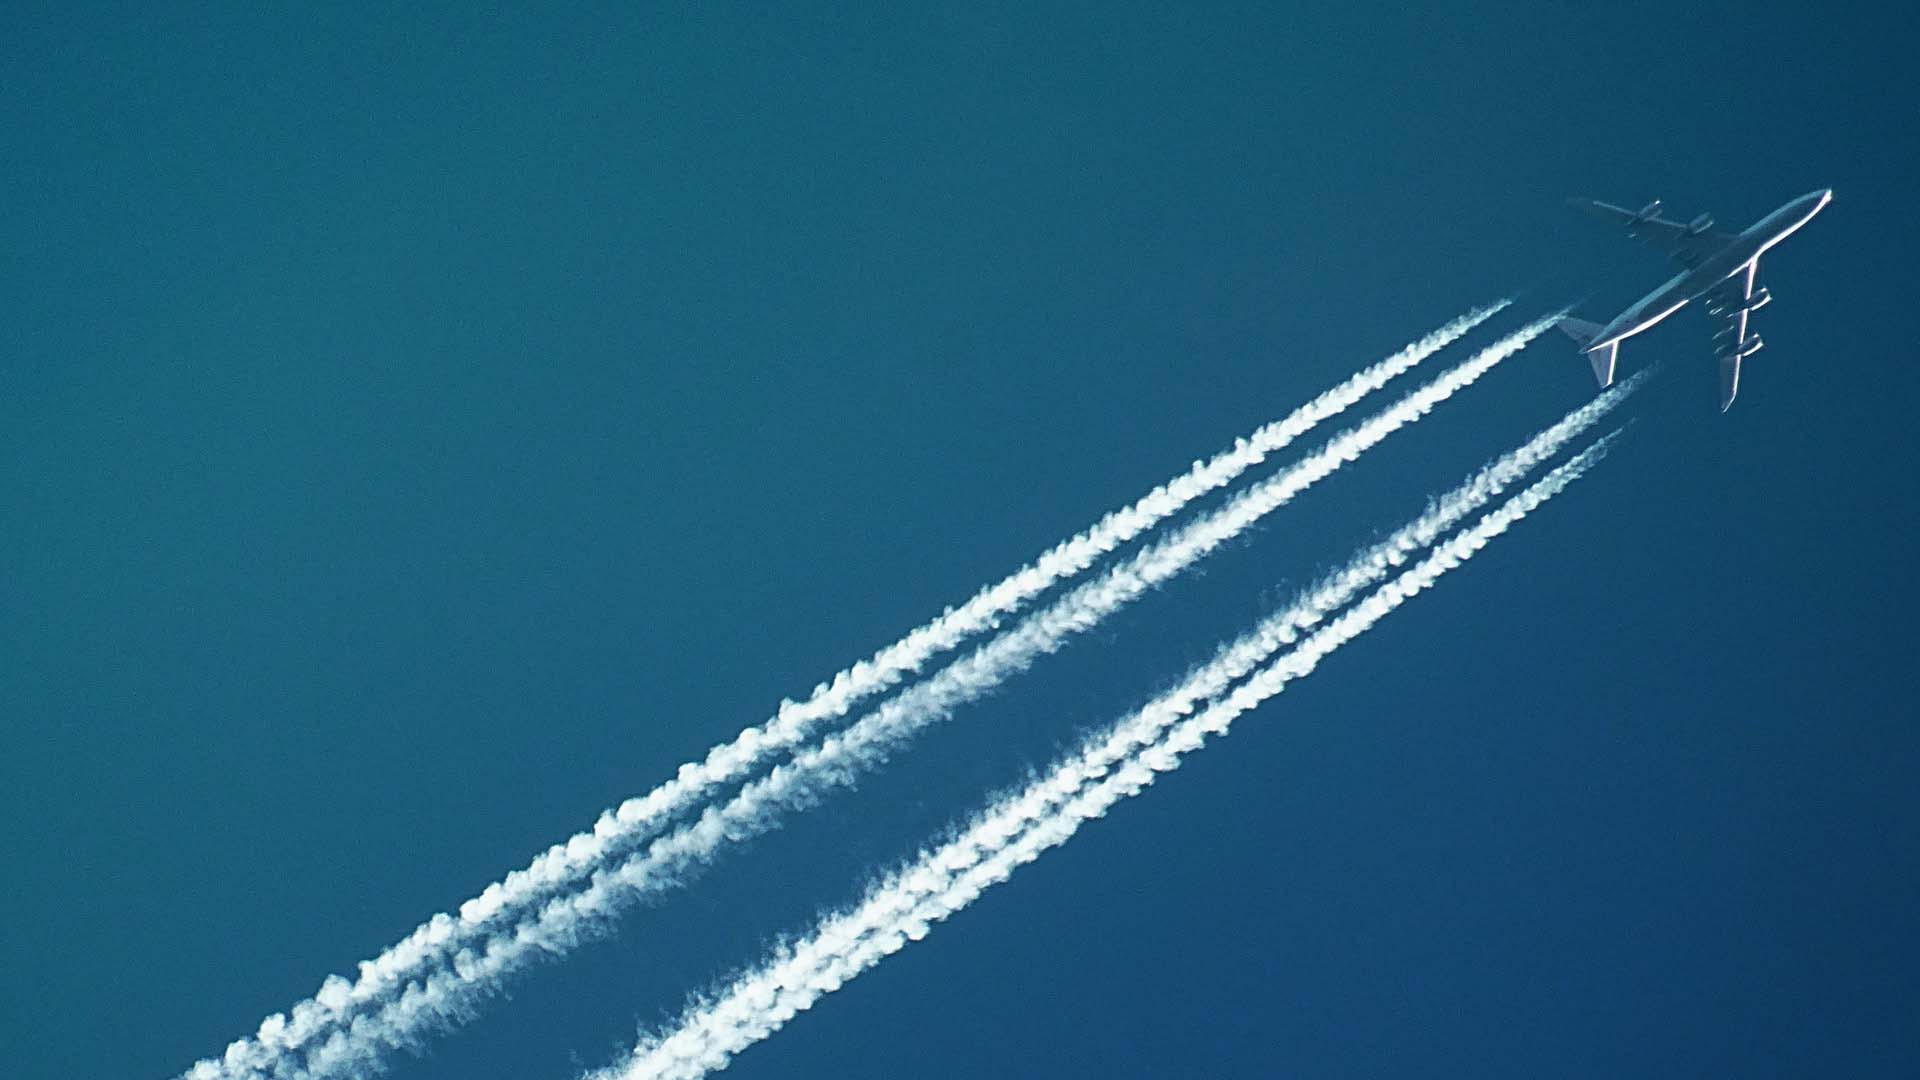 Plane flying overhead with contrails